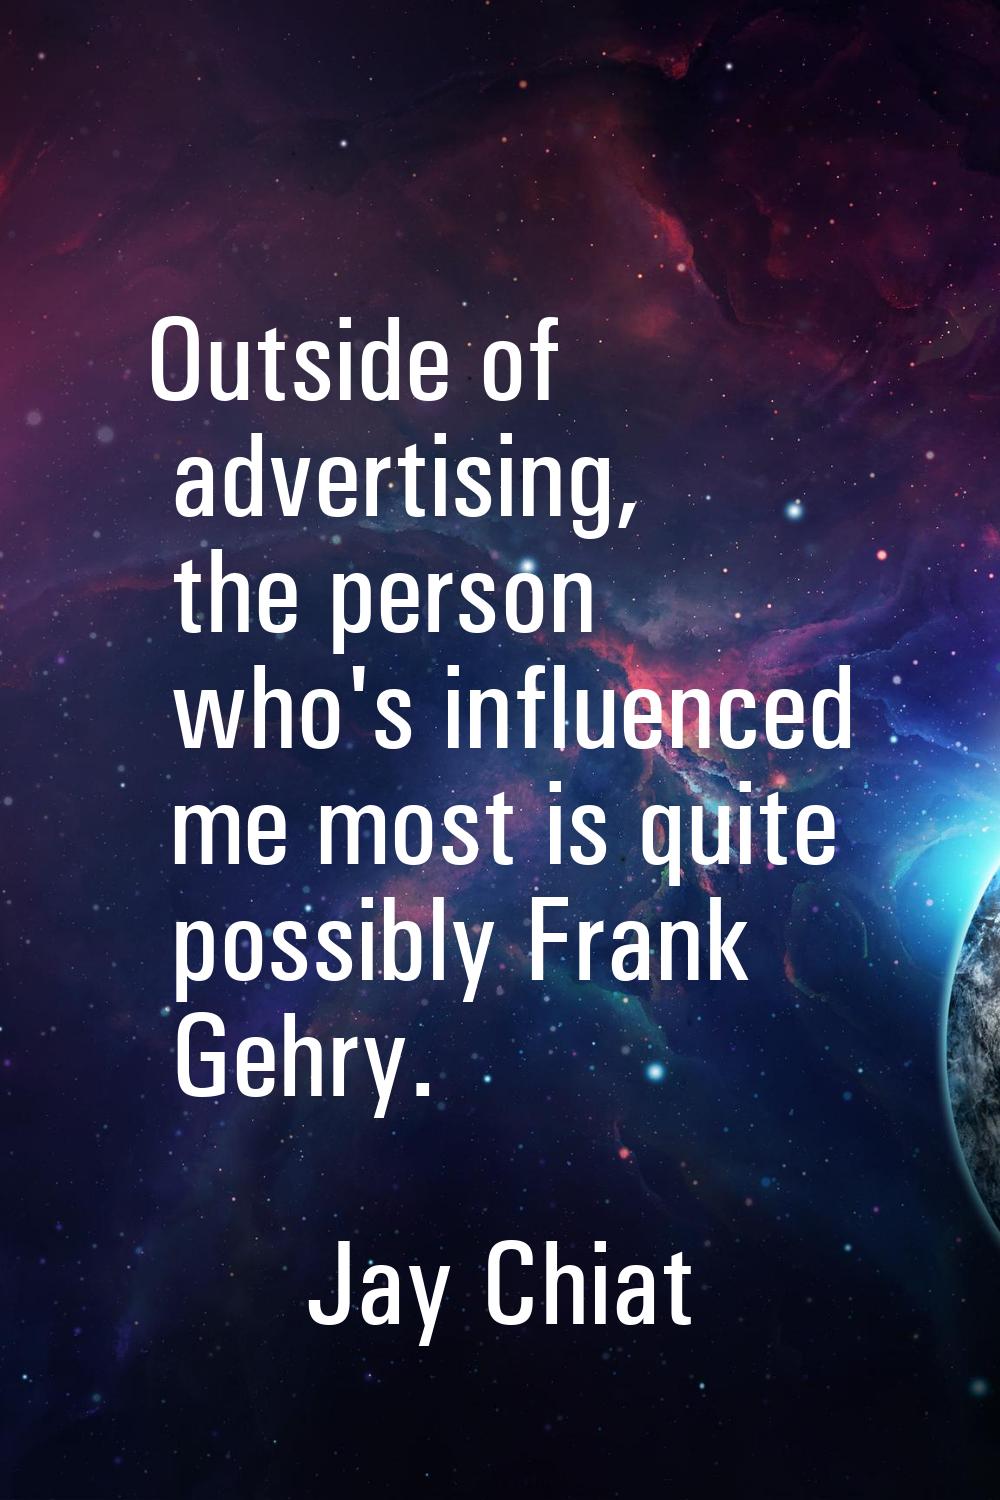 Outside of advertising, the person who's influenced me most is quite possibly Frank Gehry.